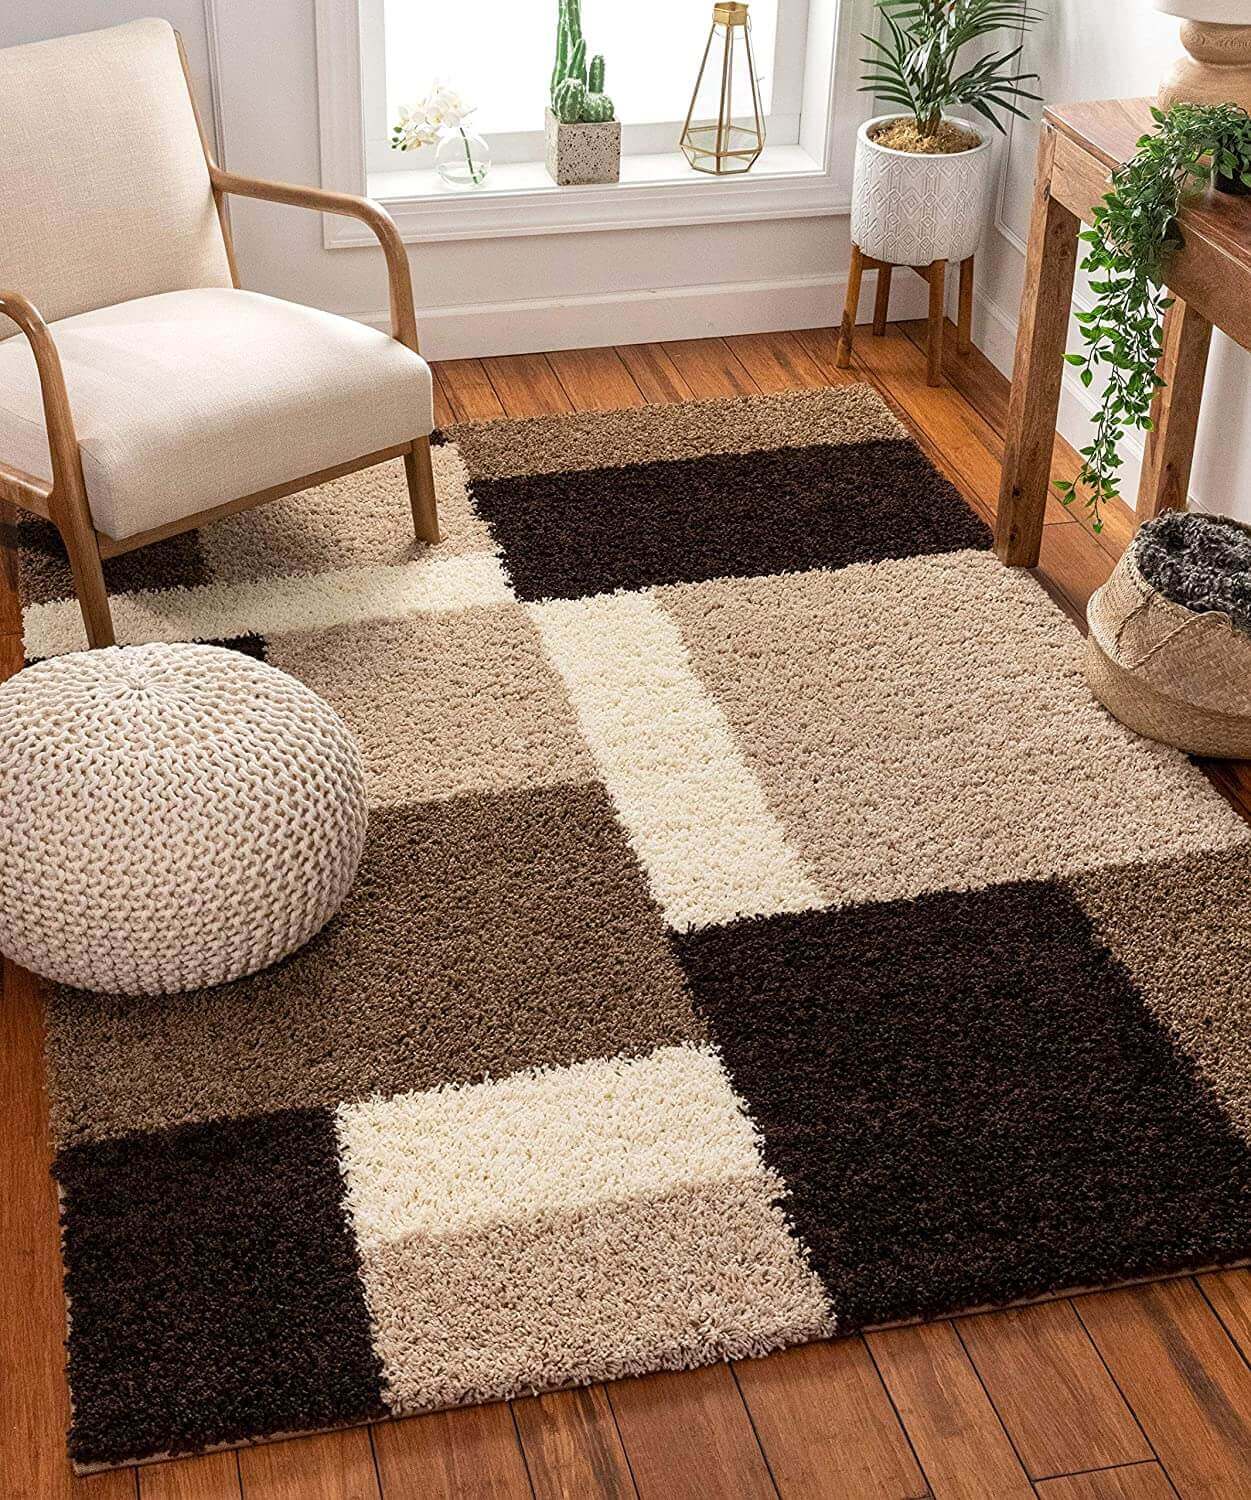 Area Rug Ideas A Khaki Color Complements Natural Themes